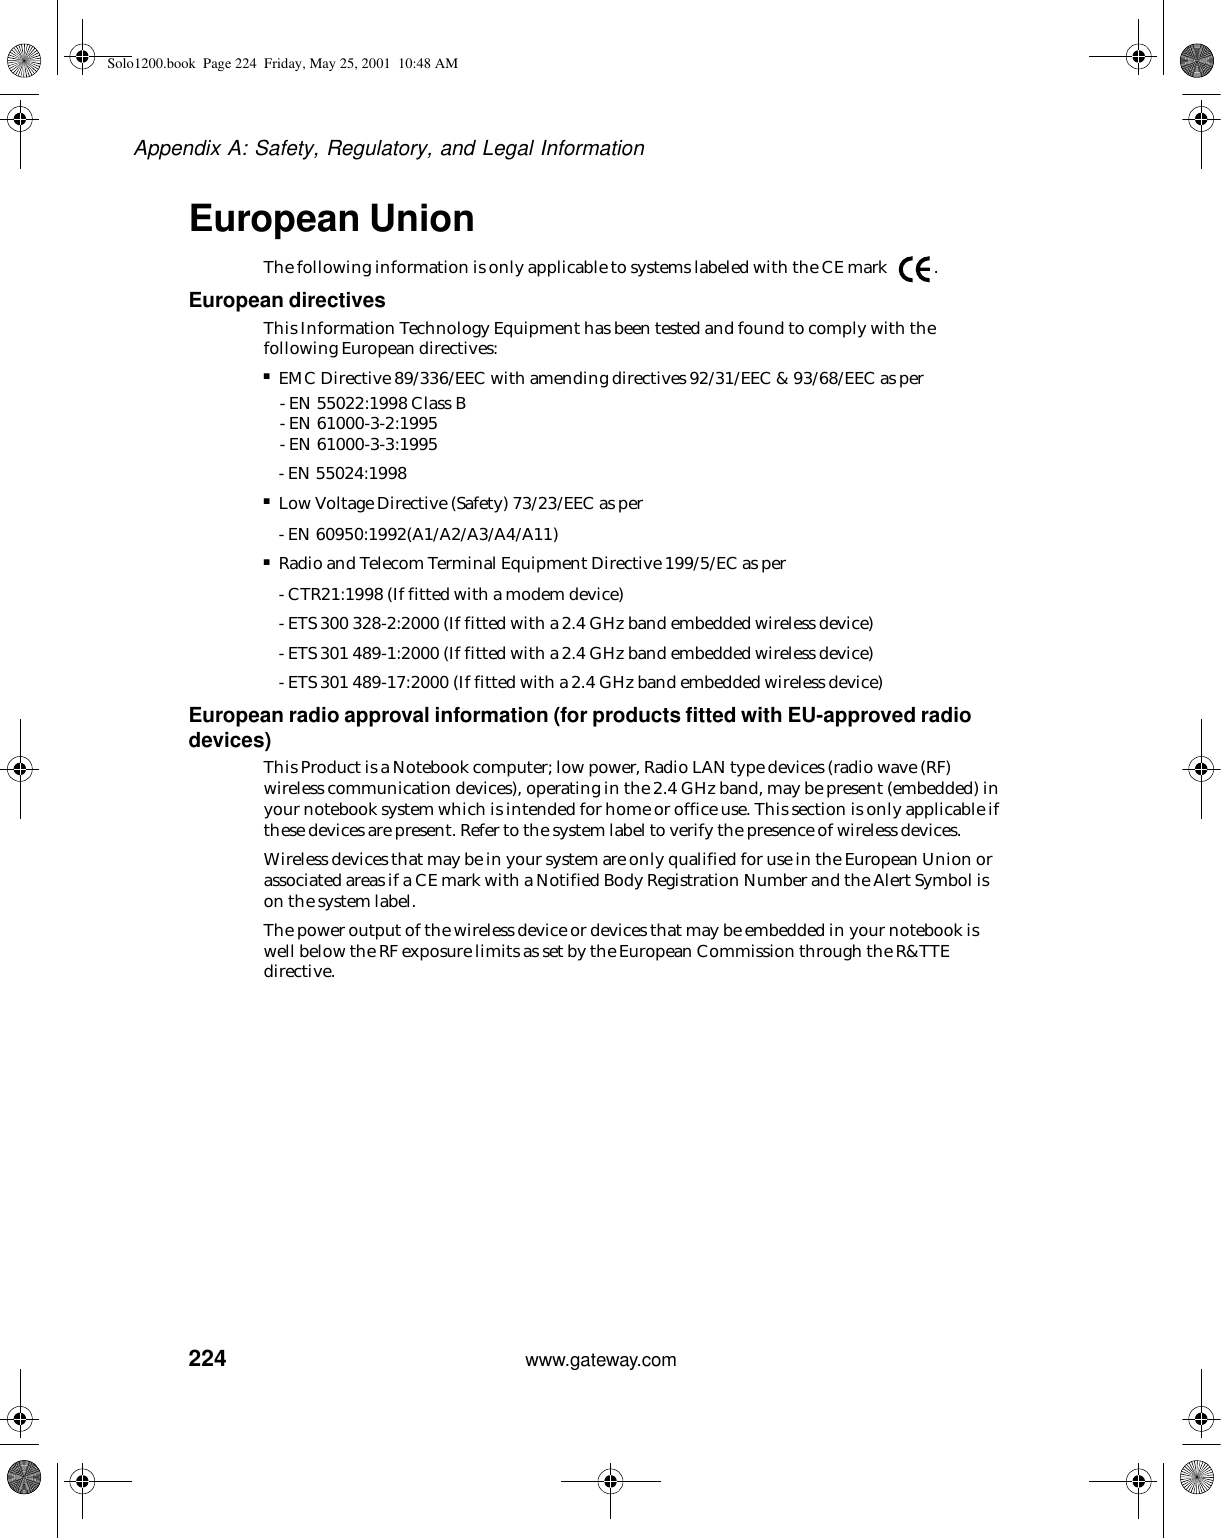 224Appendix A: Safety, Regulatory, and Legal Informationwww.gateway.comEuropean UnionThe following information is only applicable to systems labeled with the CE mark  .European directivesThis Information Technology Equipment has been tested and found to comply with the following European directives:■EMC Directive 89/336/EEC with amending directives 92/31/EEC &amp; 93/68/EEC as per- EN 55022:1998 Class B- EN 61000-3-2:1995- EN 61000-3-3:1995- EN 55024:1998■Low Voltage Directive (Safety) 73/23/EEC as per- EN 60950:1992(A1/A2/A3/A4/A11)■Radio and Telecom Terminal Equipment Directive 199/5/EC as per- CTR21:1998 (If fitted with a modem device)- ETS 300 328-2:2000 (If fitted with a 2.4 GHz band embedded wireless device)- ETS 301 489-1:2000 (If fitted with a 2.4 GHz band embedded wireless device)- ETS 301 489-17:2000 (If fitted with a 2.4 GHz band embedded wireless device)European radio approval information (for products fitted with EU-approved radio devices)This Product is a Notebook computer; low power, Radio LAN type devices (radio wave (RF) wireless communication devices), operating in the 2.4 GHz band, may be present (embedded) in your notebook system which is intended for home or office use. This section is only applicable if these devices are present. Refer to the system label to verify the presence of wireless devices.Wireless devices that may be in your system are only qualified for use in the European Union or associated areas if a CE mark with a Notified Body Registration Number and the Alert Symbol is on the system label.The power output of the wireless device or devices that may be embedded in your notebook is well below the RF exposure limits as set by the European Commission through the R&amp;TTE directive.Solo1200.book Page 224 Friday, May 25, 2001 10:48 AM